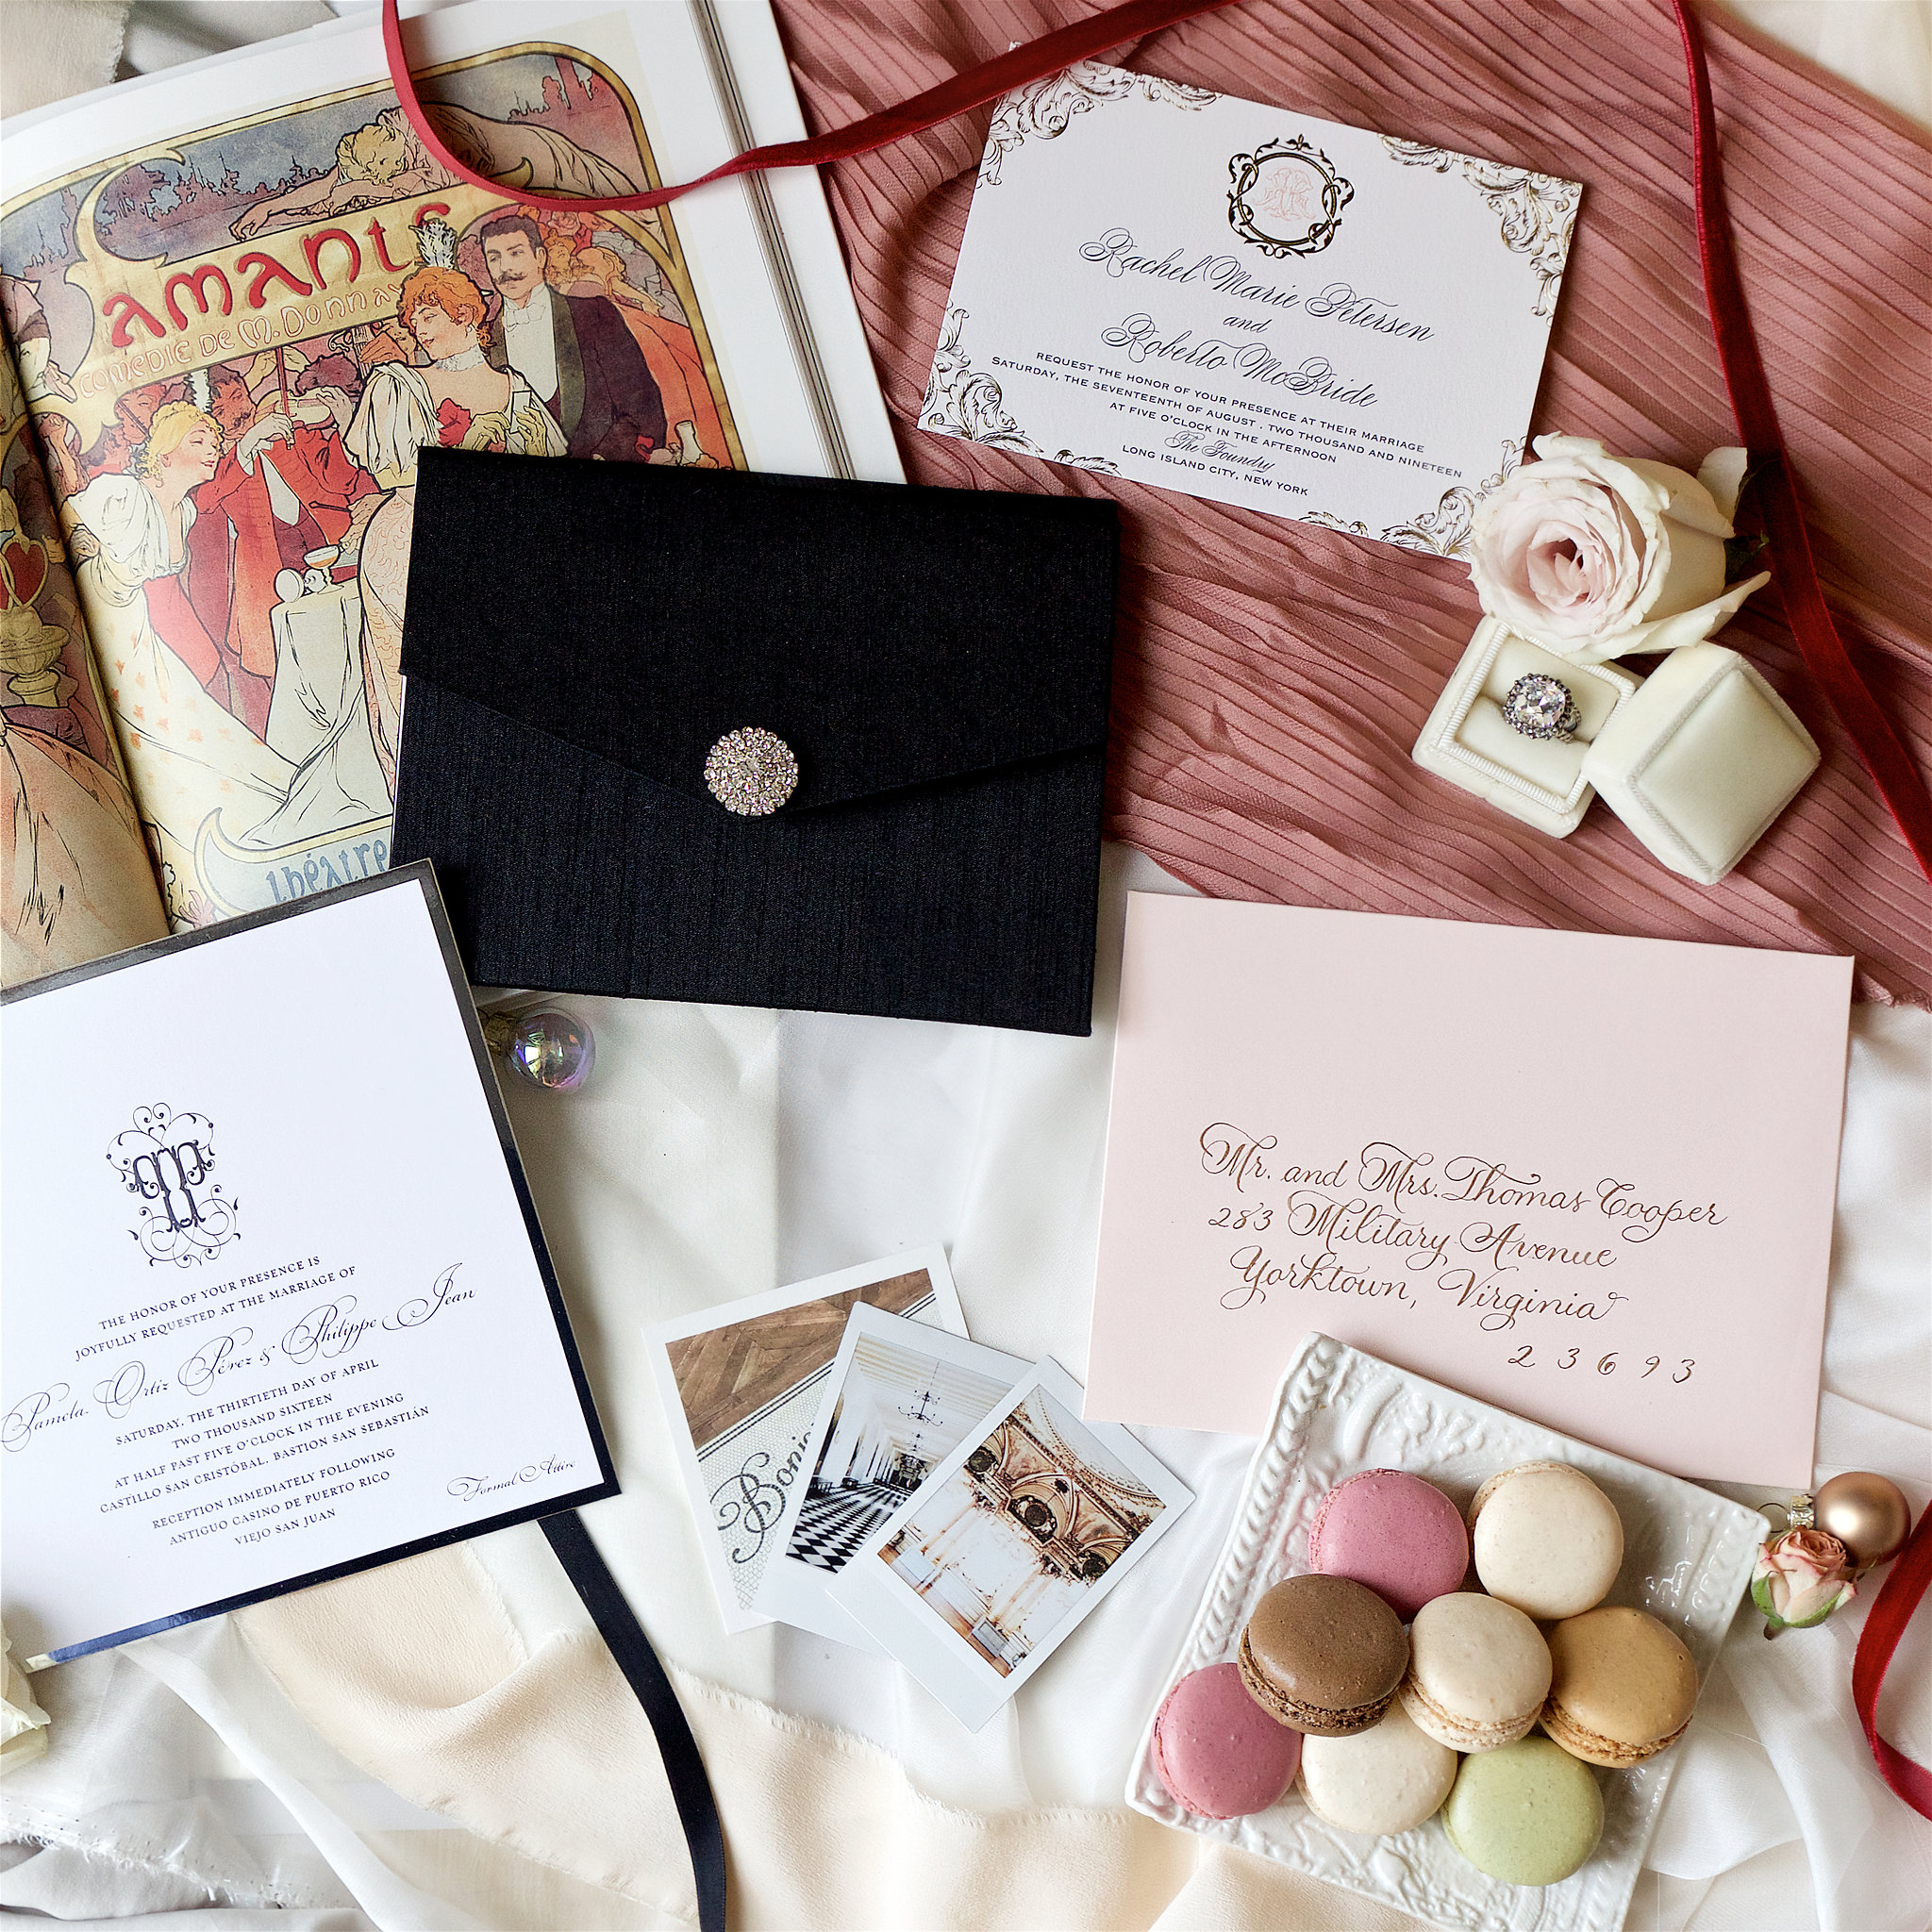 Feminine vintage French flat lay invitation suite with macarons Anthropologie Free People Etsy designer. Branding product photographer Chelsea Loren styling flat lays. Alphonse Mucha Art Nouveau French Parisian.